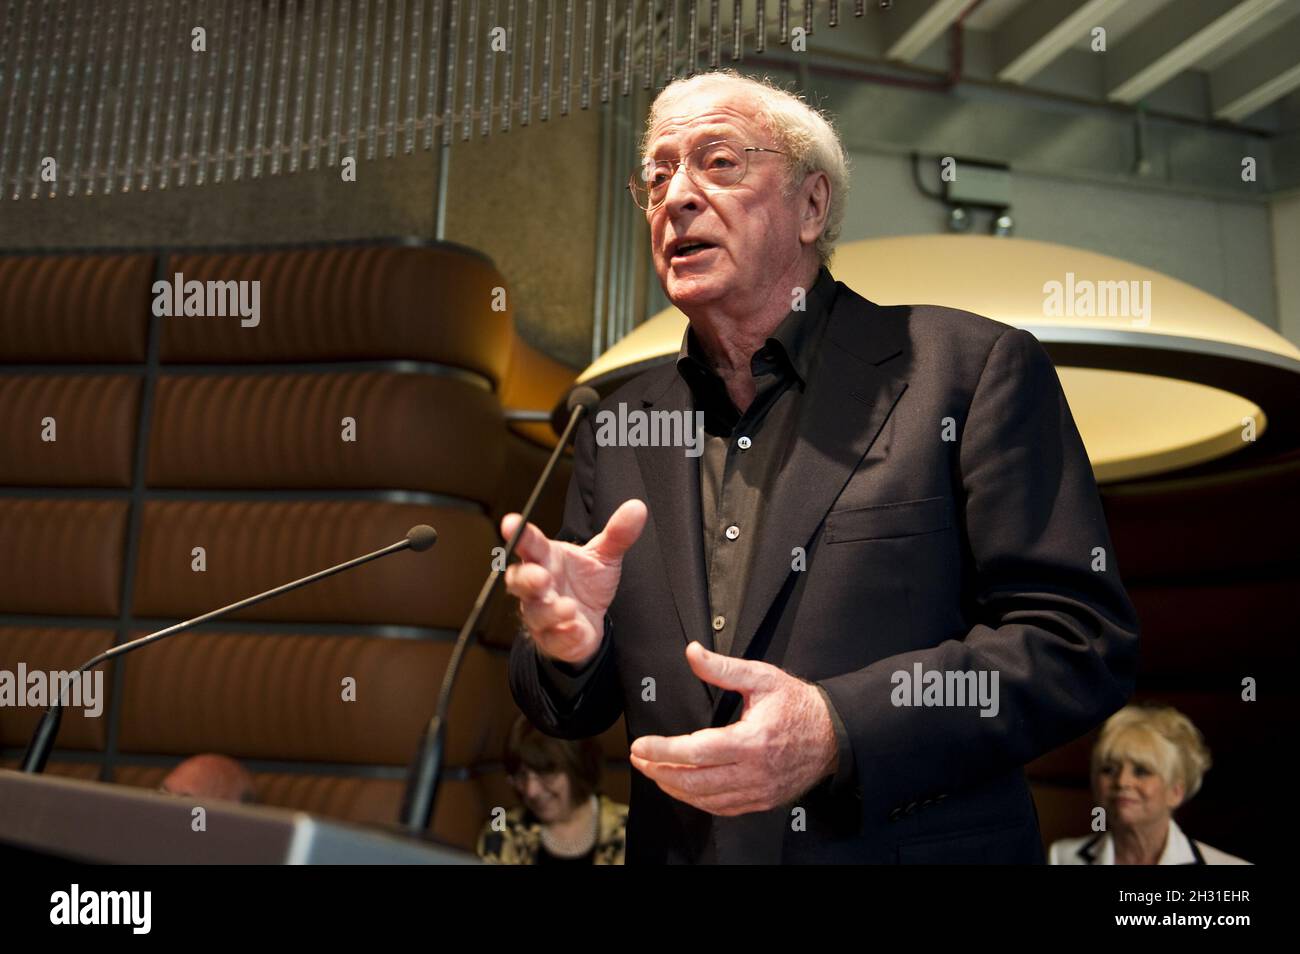 Sir Michael Caine speaks at  the £20 Million Opening of the Galleries of Modern London at the Museum of London, London, 27th May 2010. Stock Photo